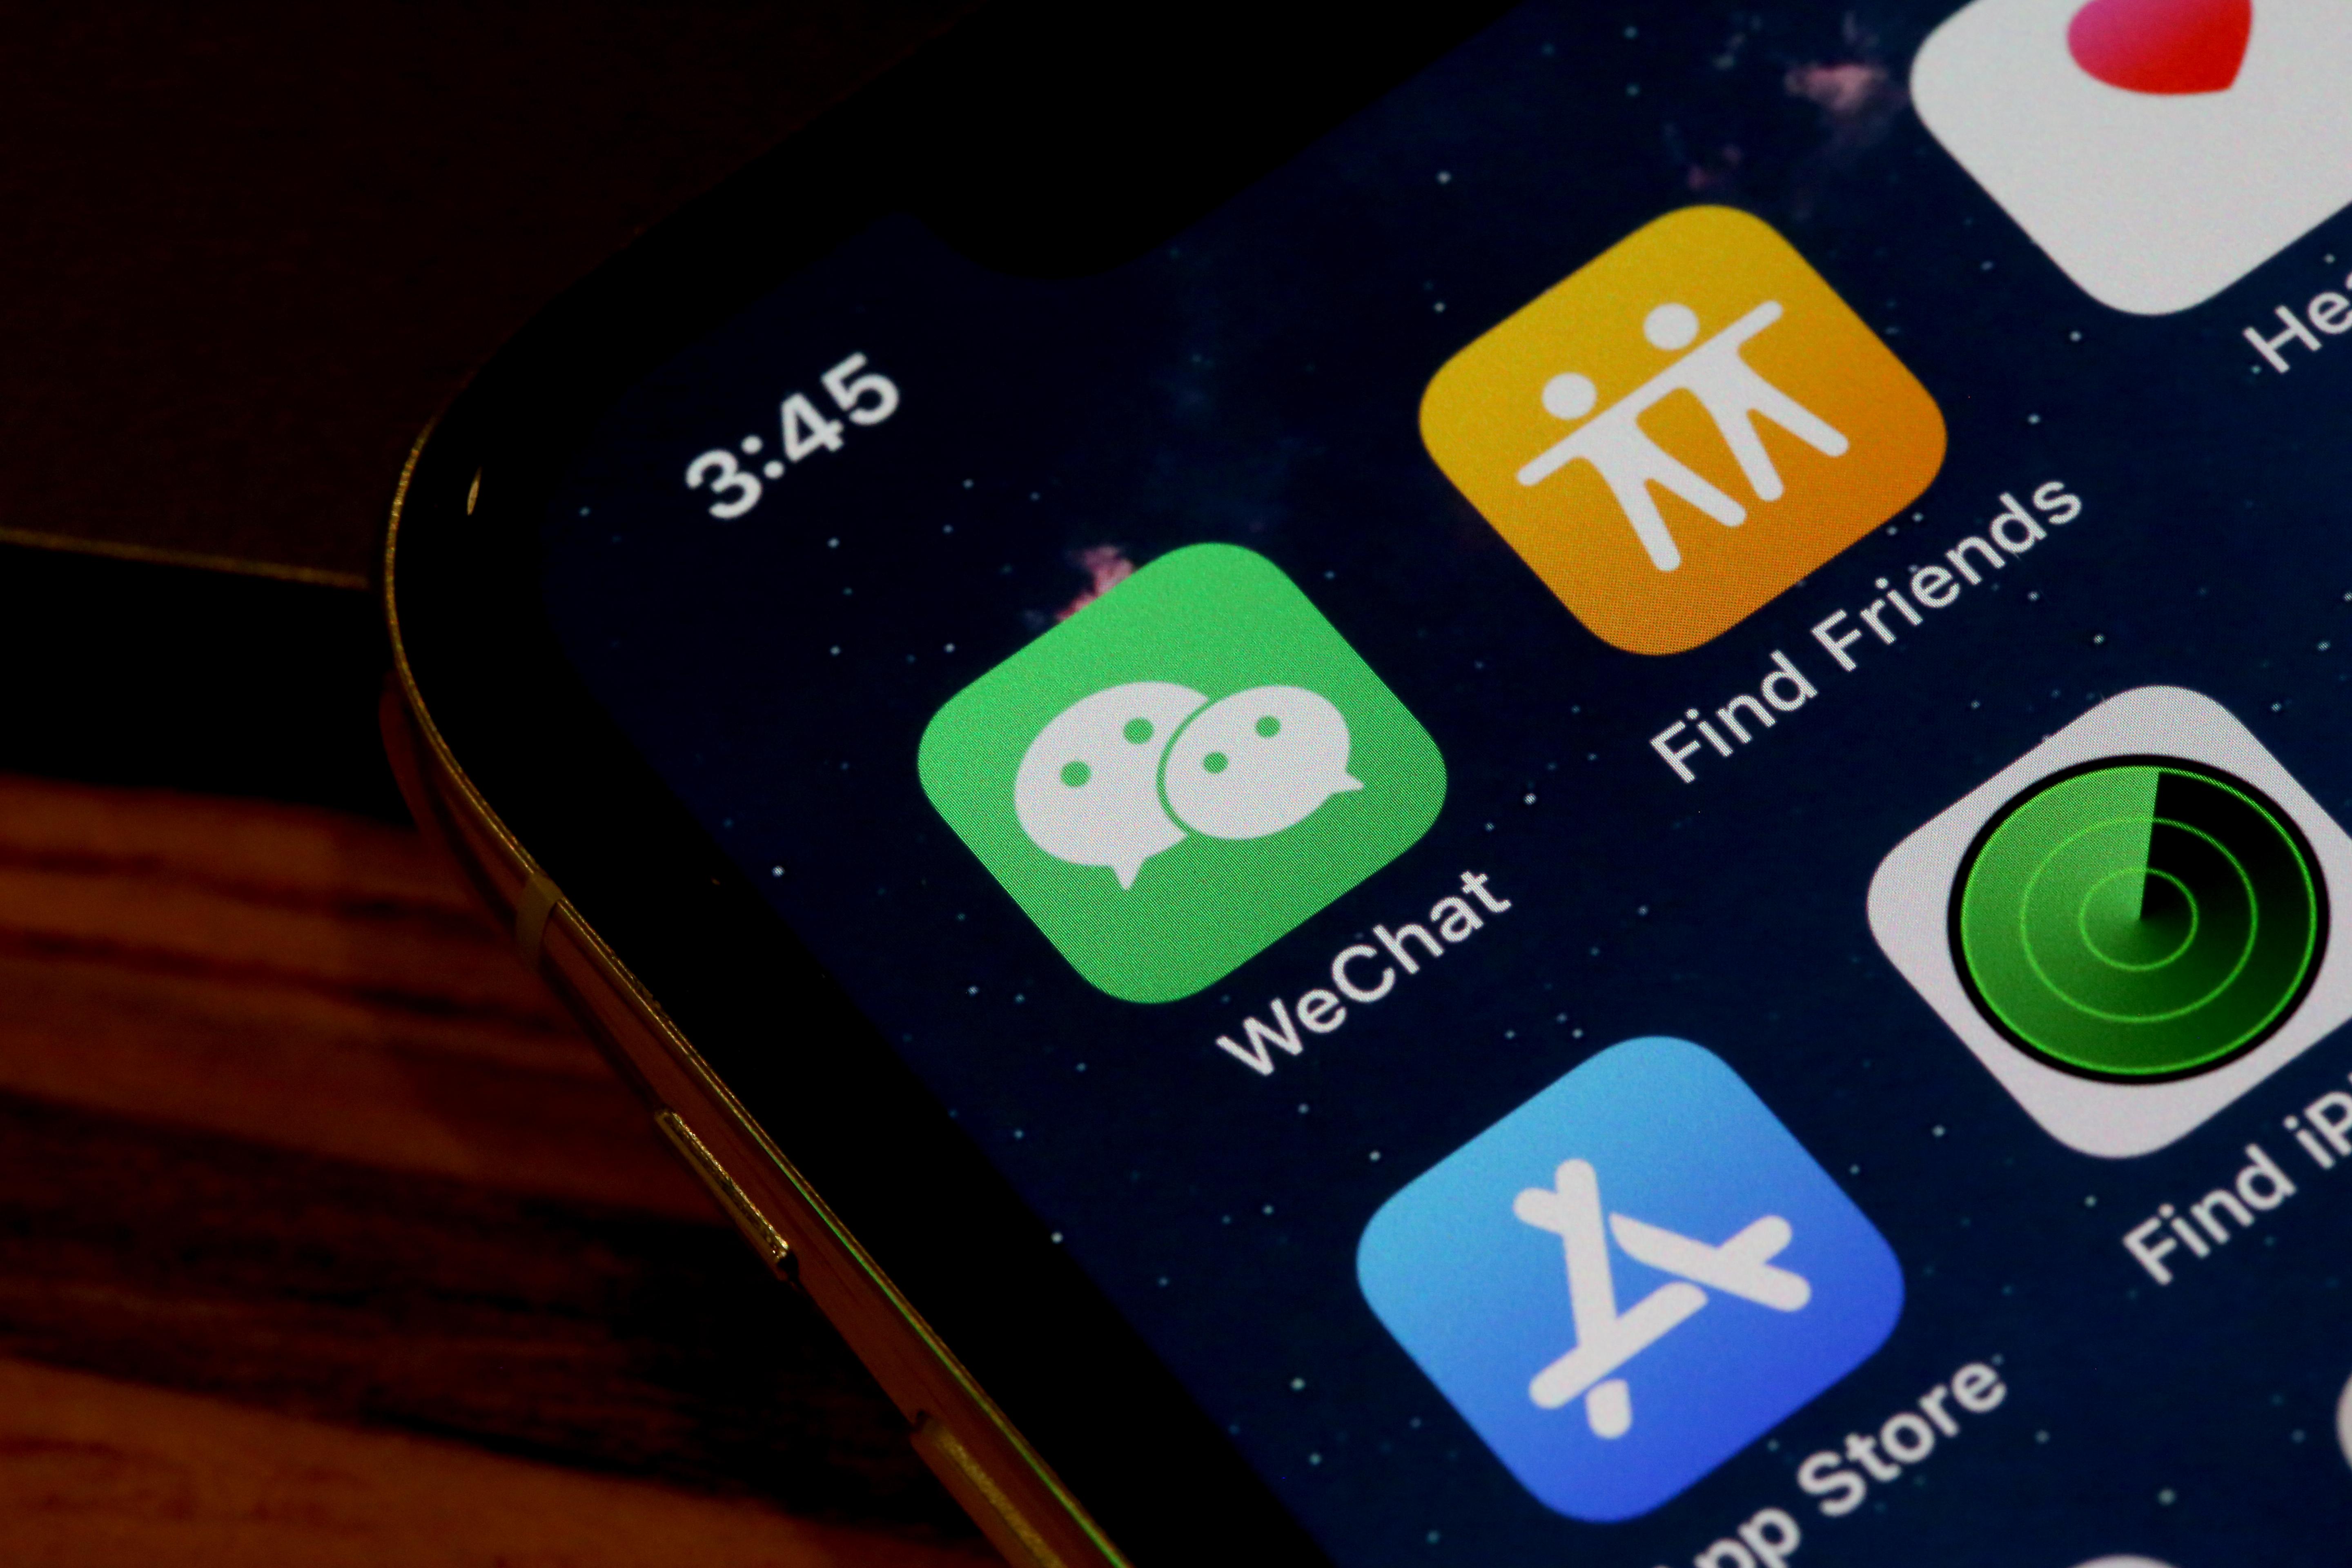 WeChat targets ByteDance’s collaboration app Feishu in latest restriction